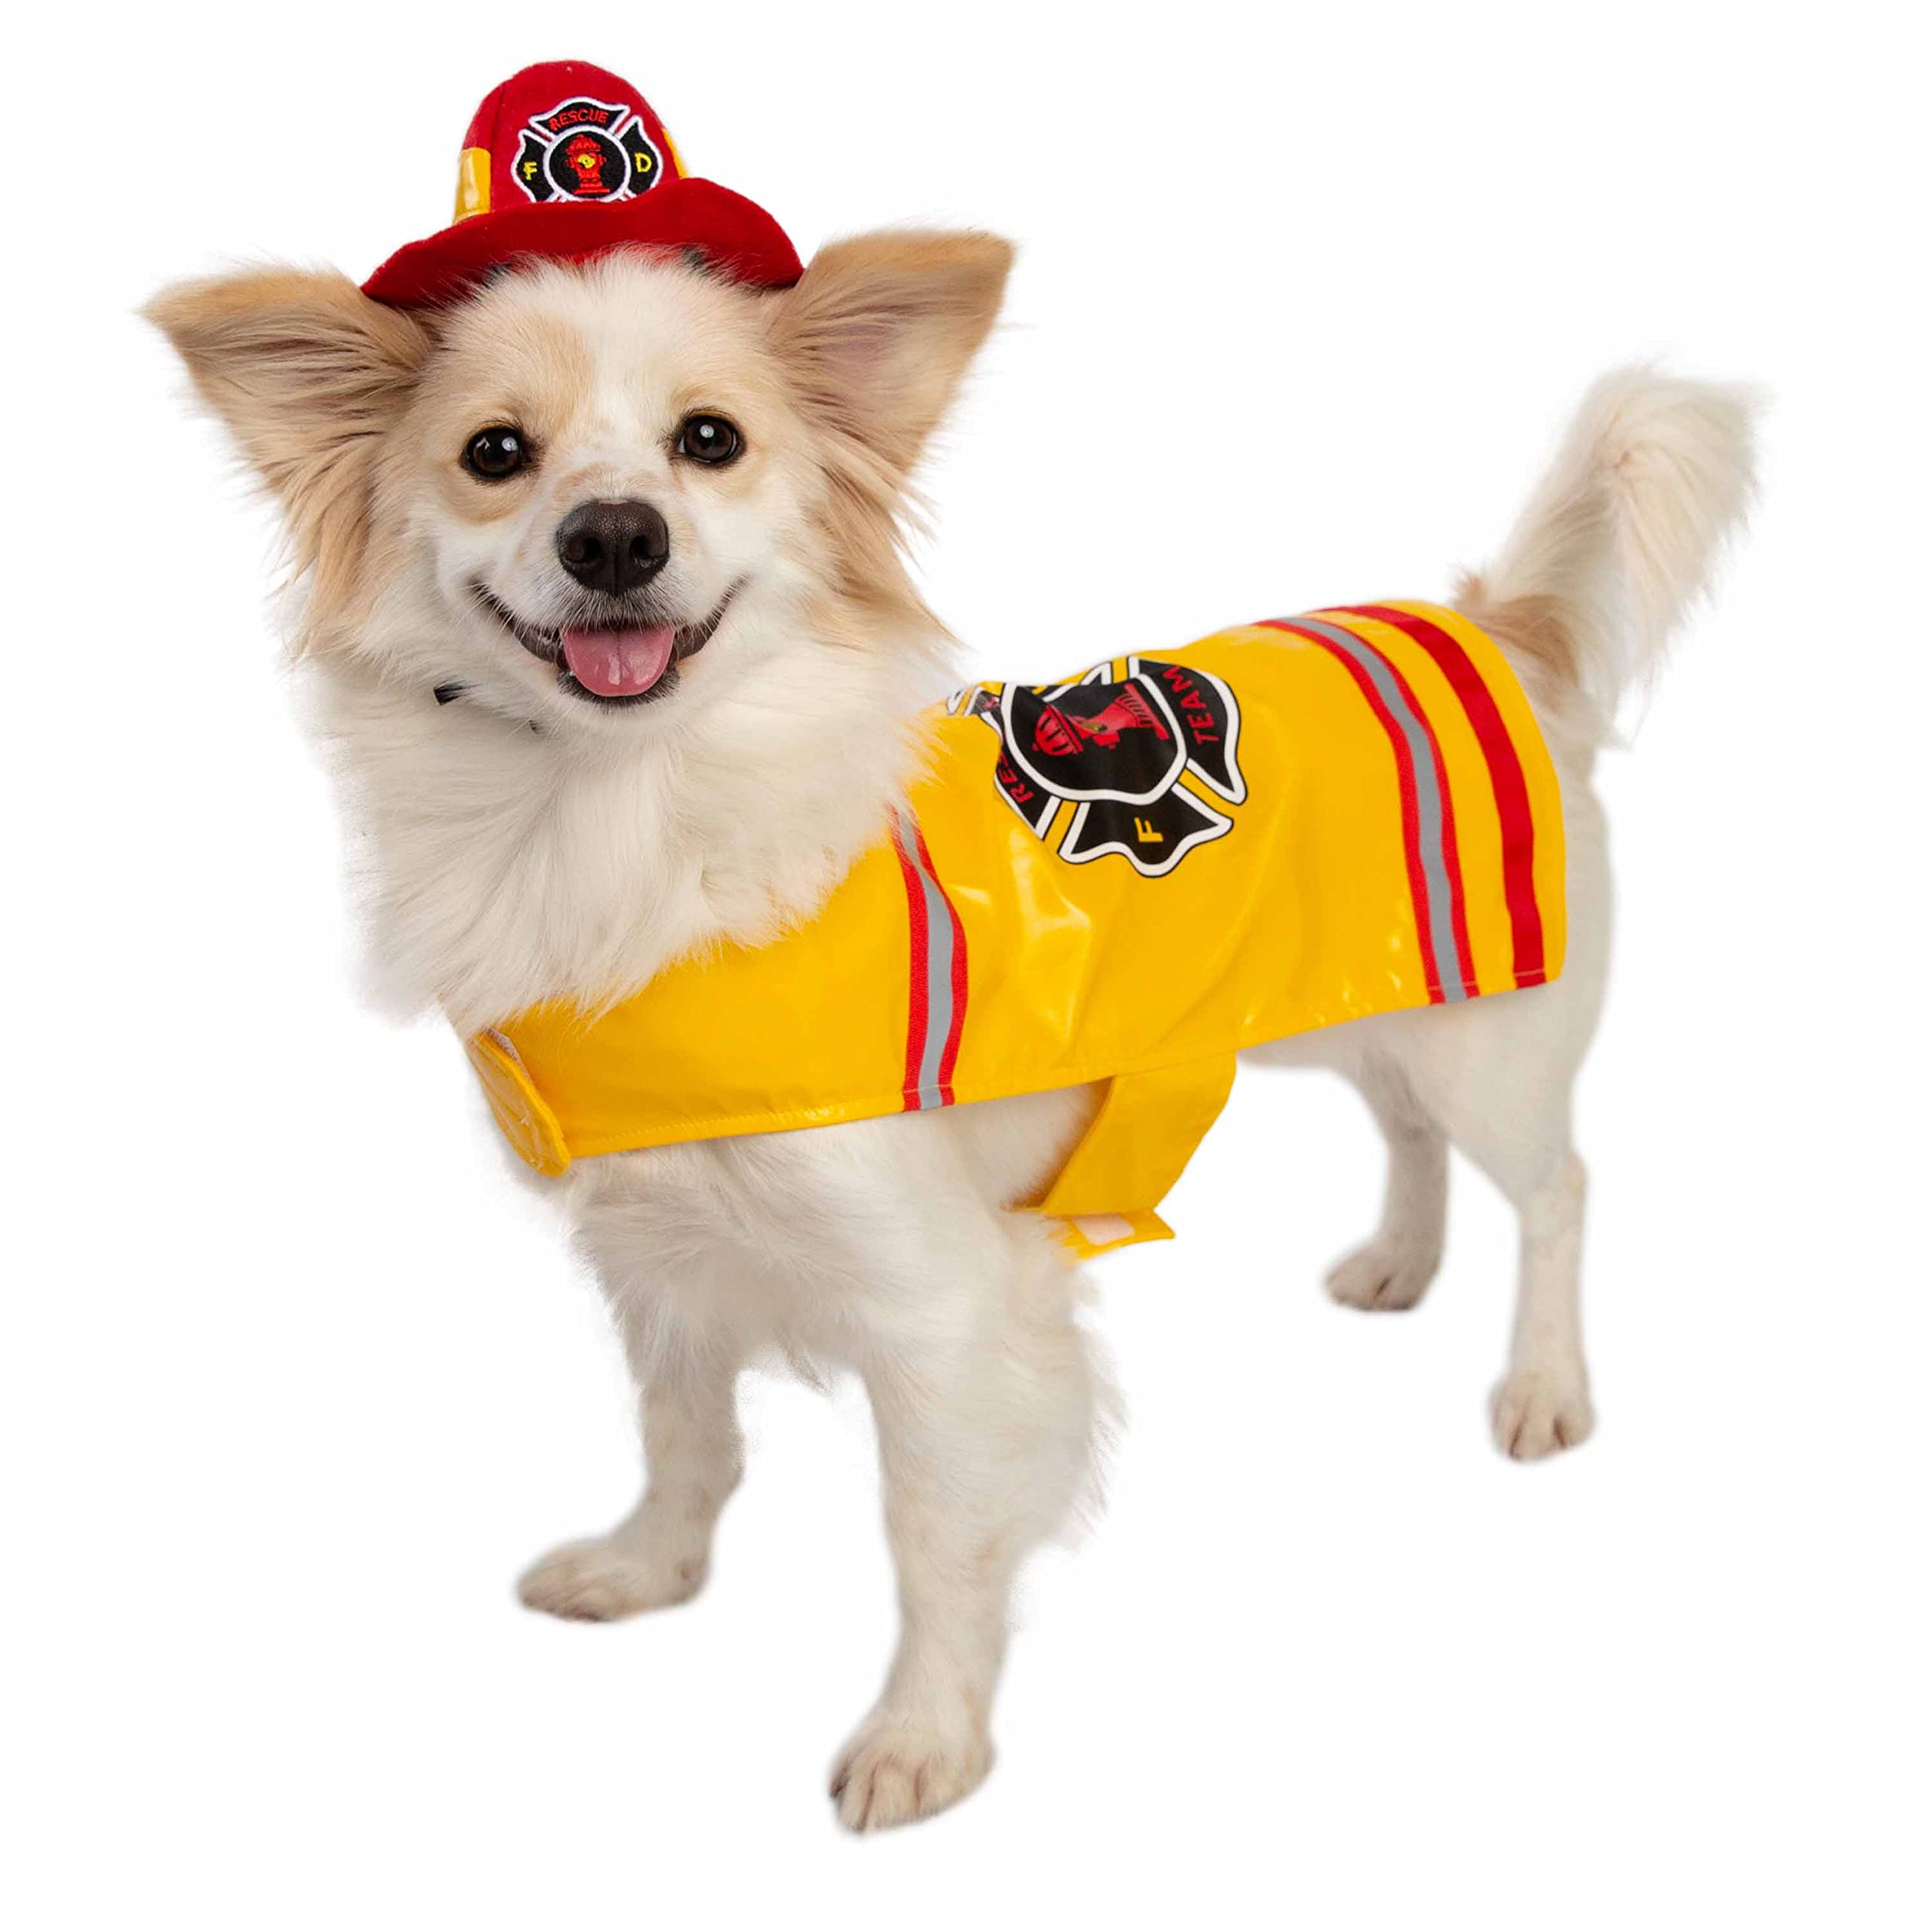 Pet Krewe Dog Firefighter Costume - Funny Halloween Pet Fireman Outfit Costumes for Small, Medium, Large Cats and Dogs.  - Like New